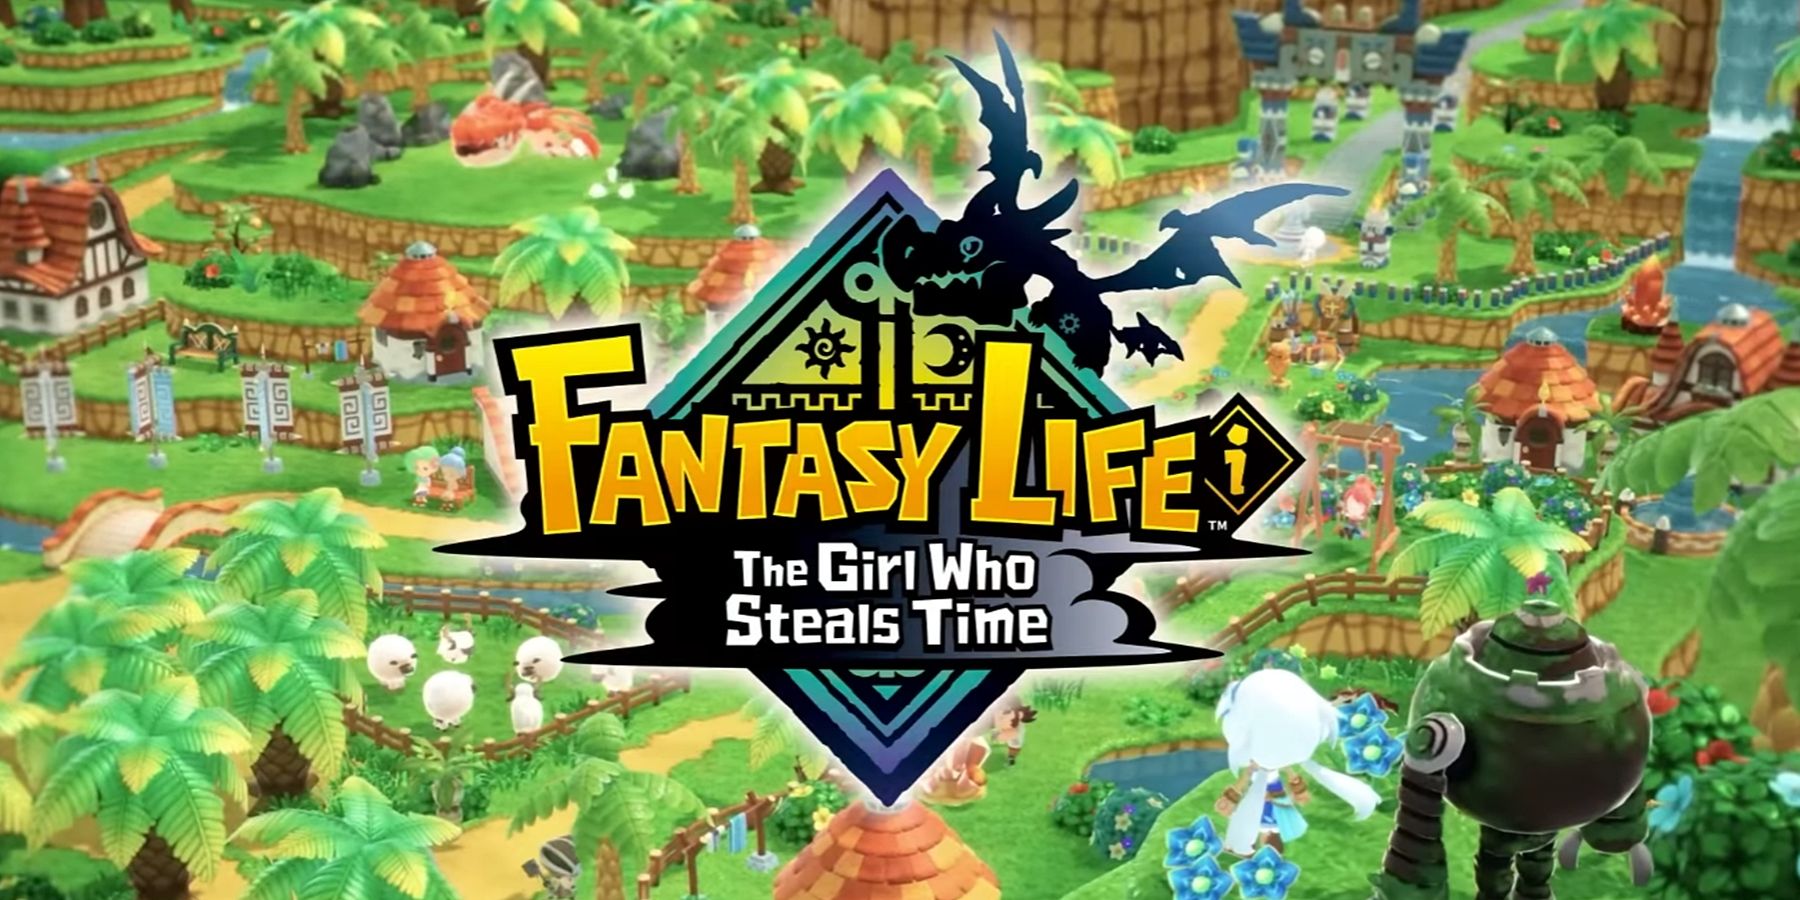 fantasy life i the girl who steals time video trailer logo